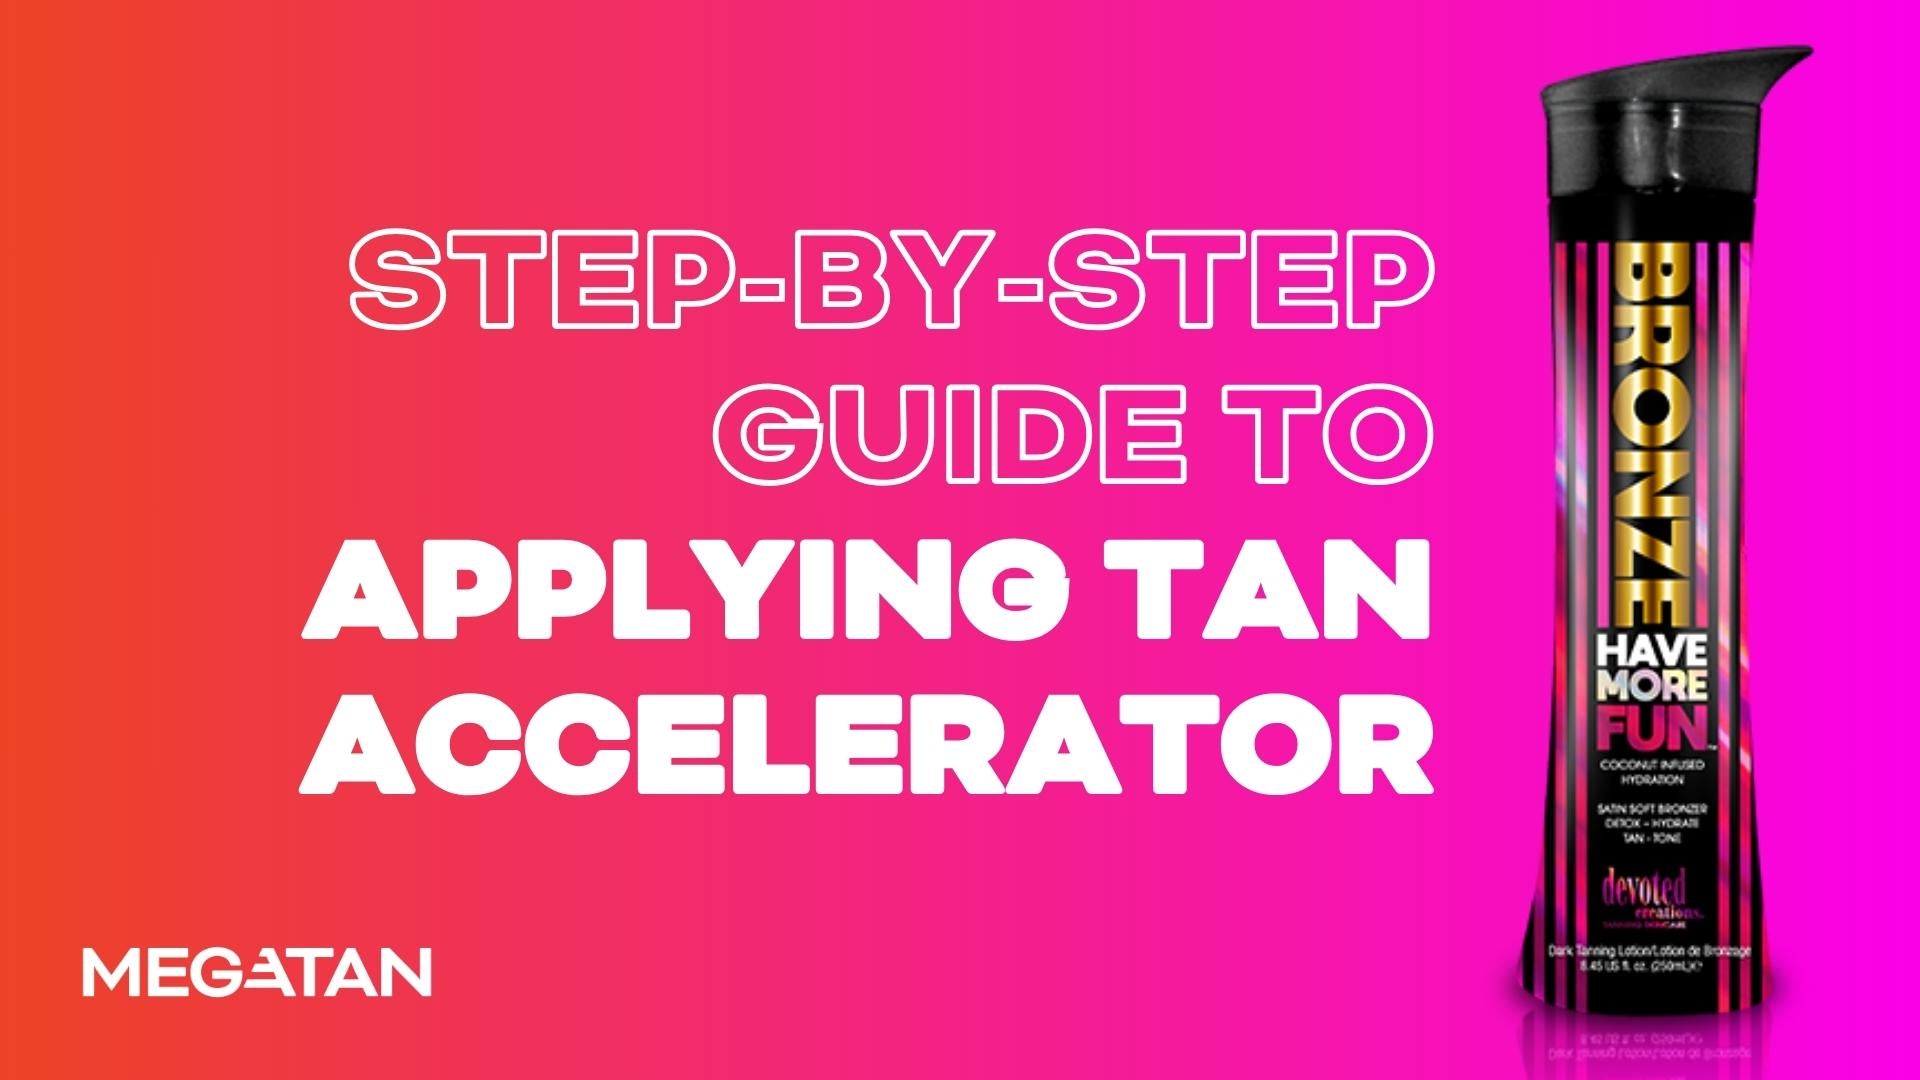 Step-by-Step Guide to Applying Tan Accelerator